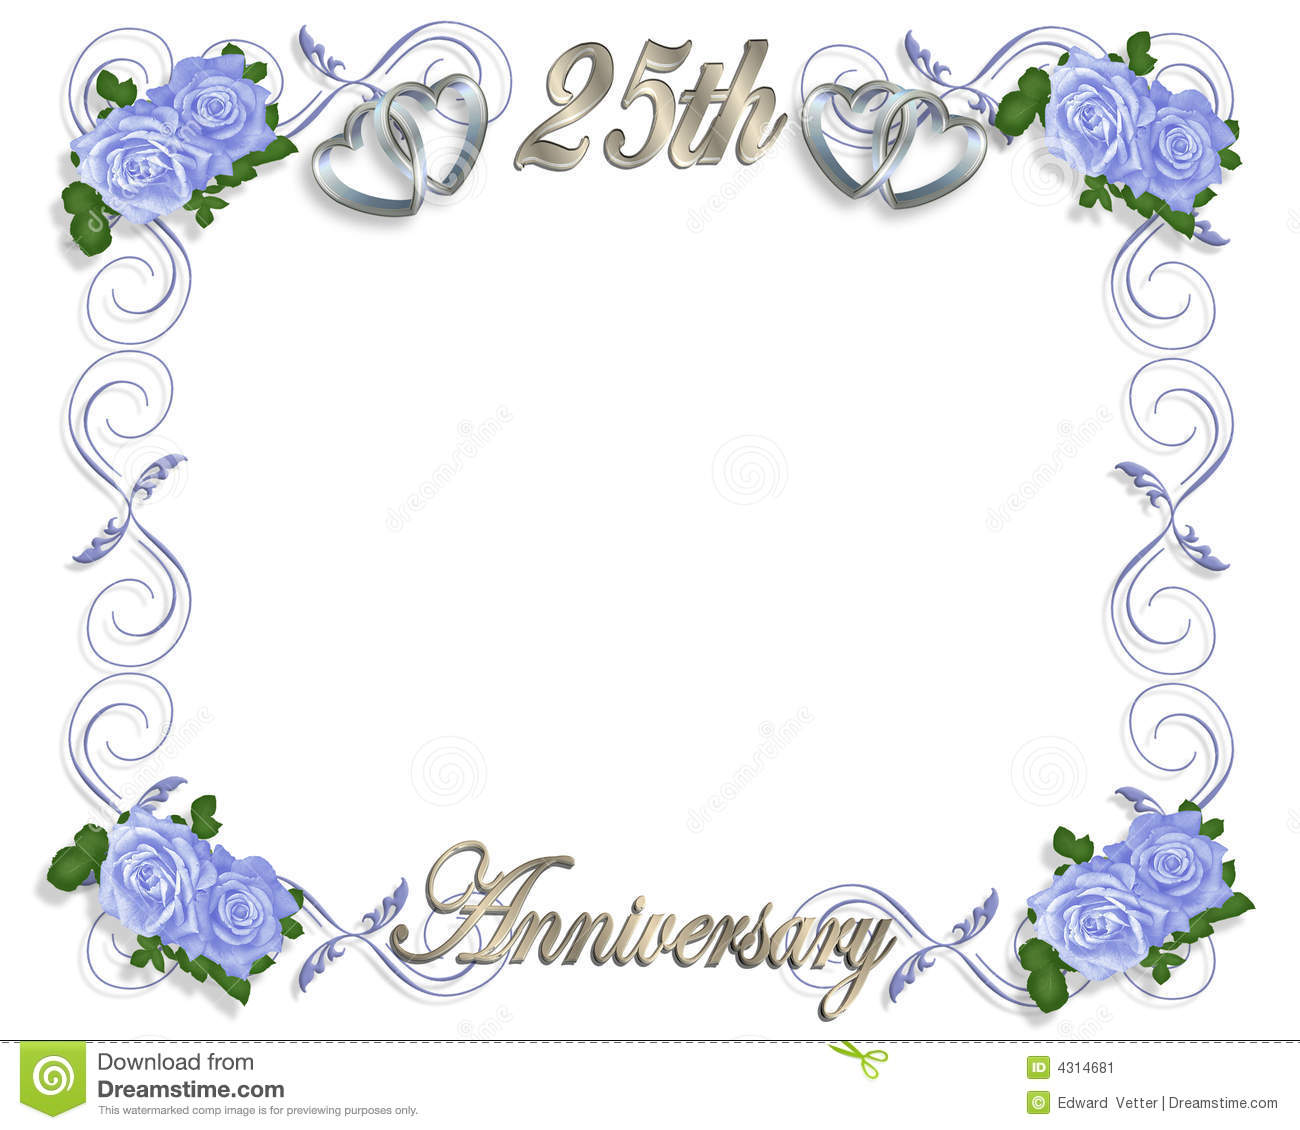 25th Anniversary Template Stock Image   Image  4314681